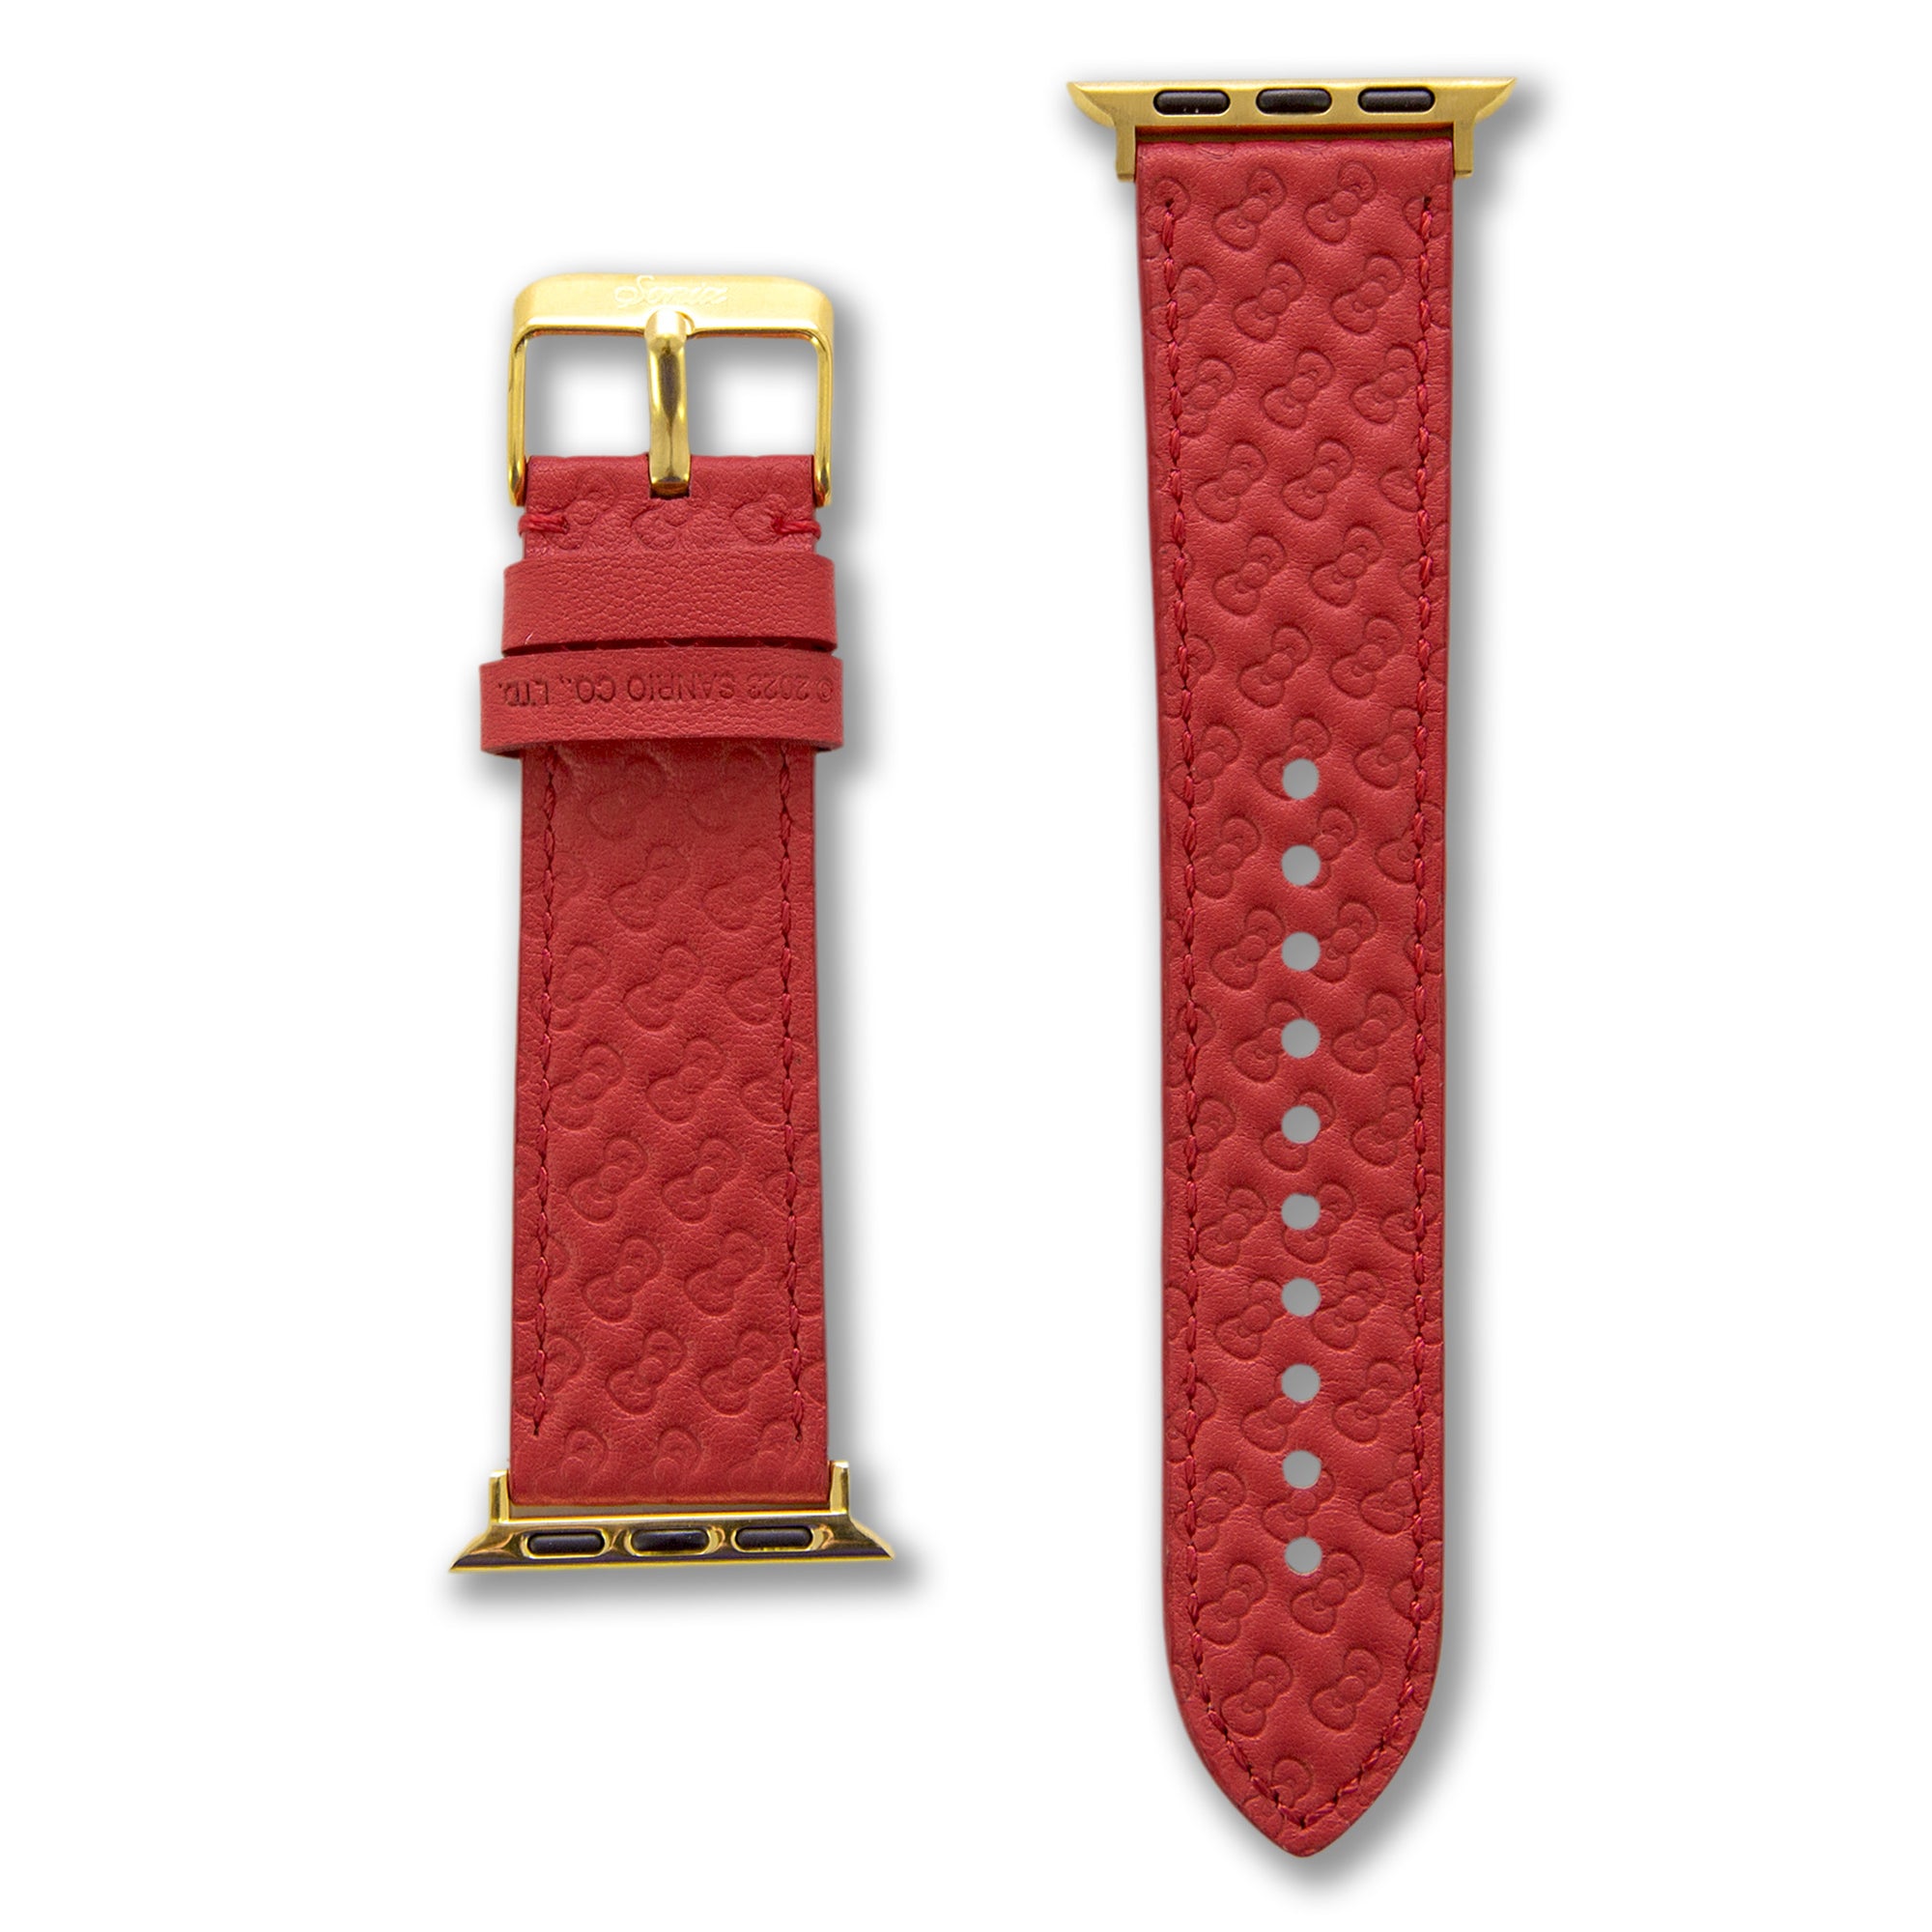 Hello Kitty x Sonix Red Bow Leather Watch Band Accessory BySonix Inc.   